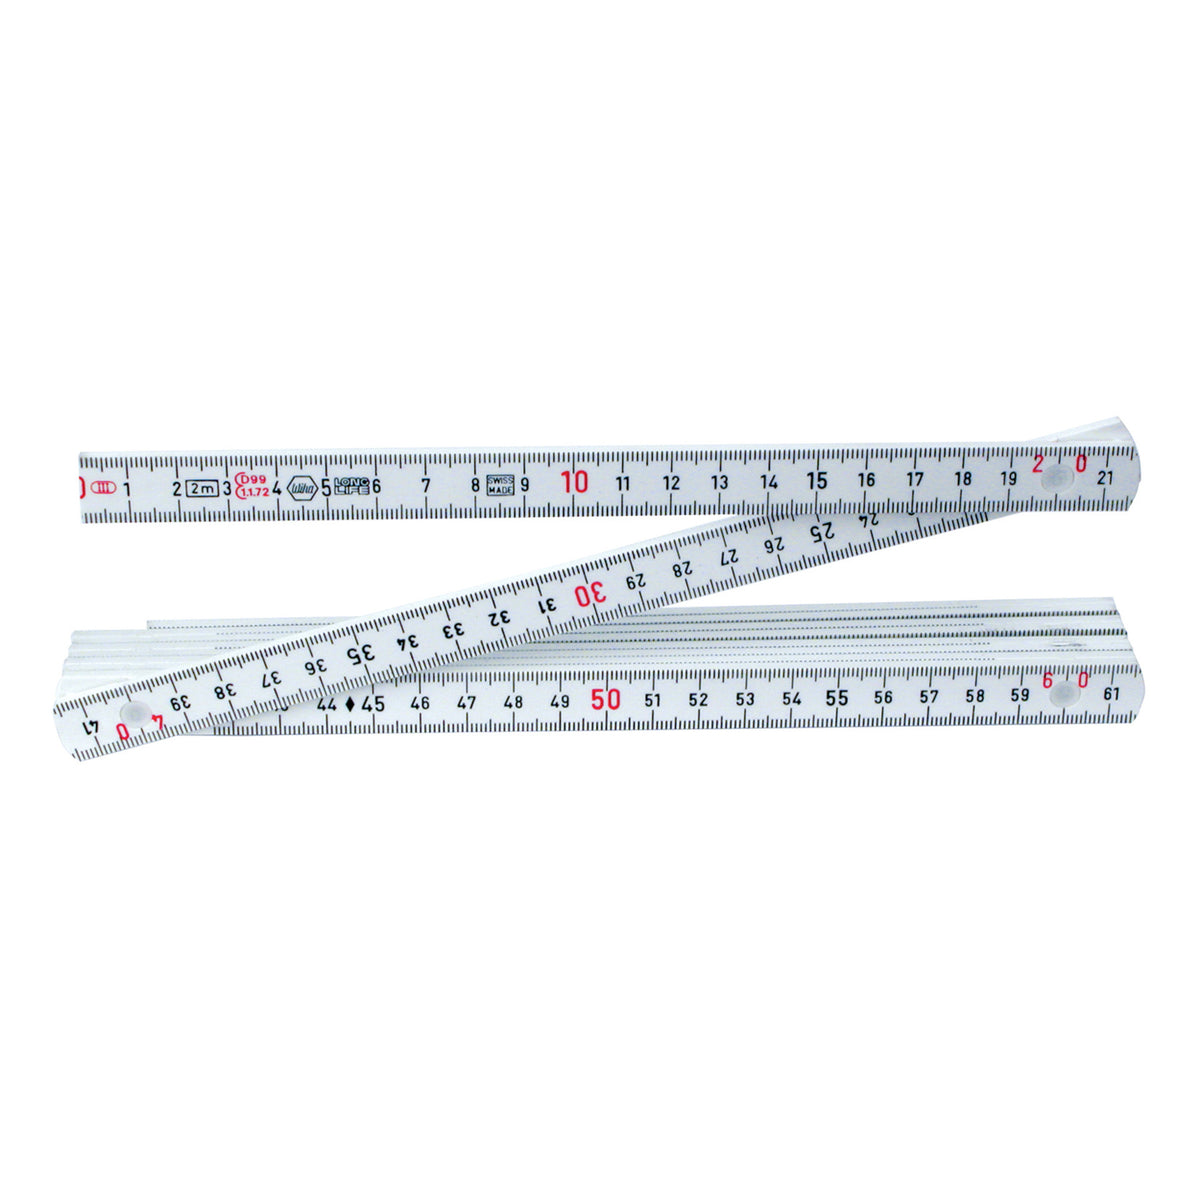 SECO Folding Ruler - Tenths/Inches